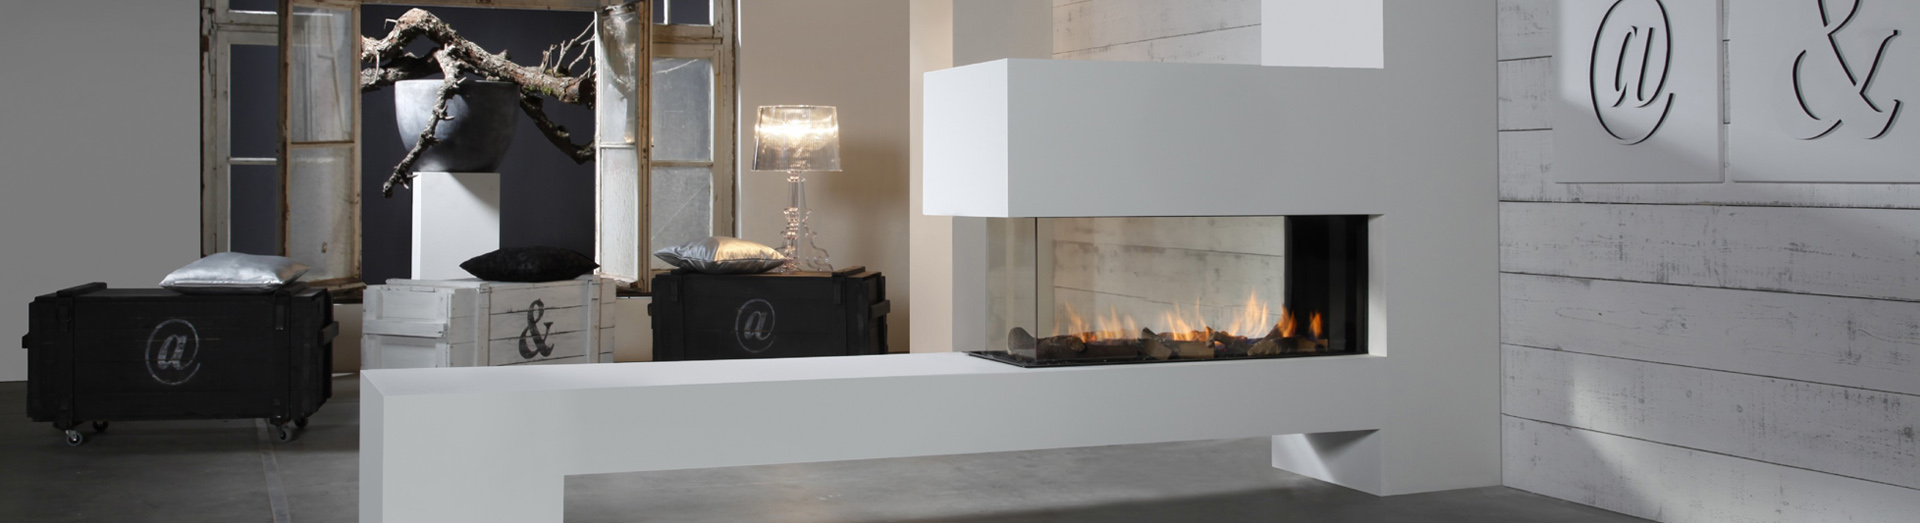 Gas Fireplace Glass Cleaner Awesome Faber Fires Balanced Flue Gas Fires and Wood Burning Stoves